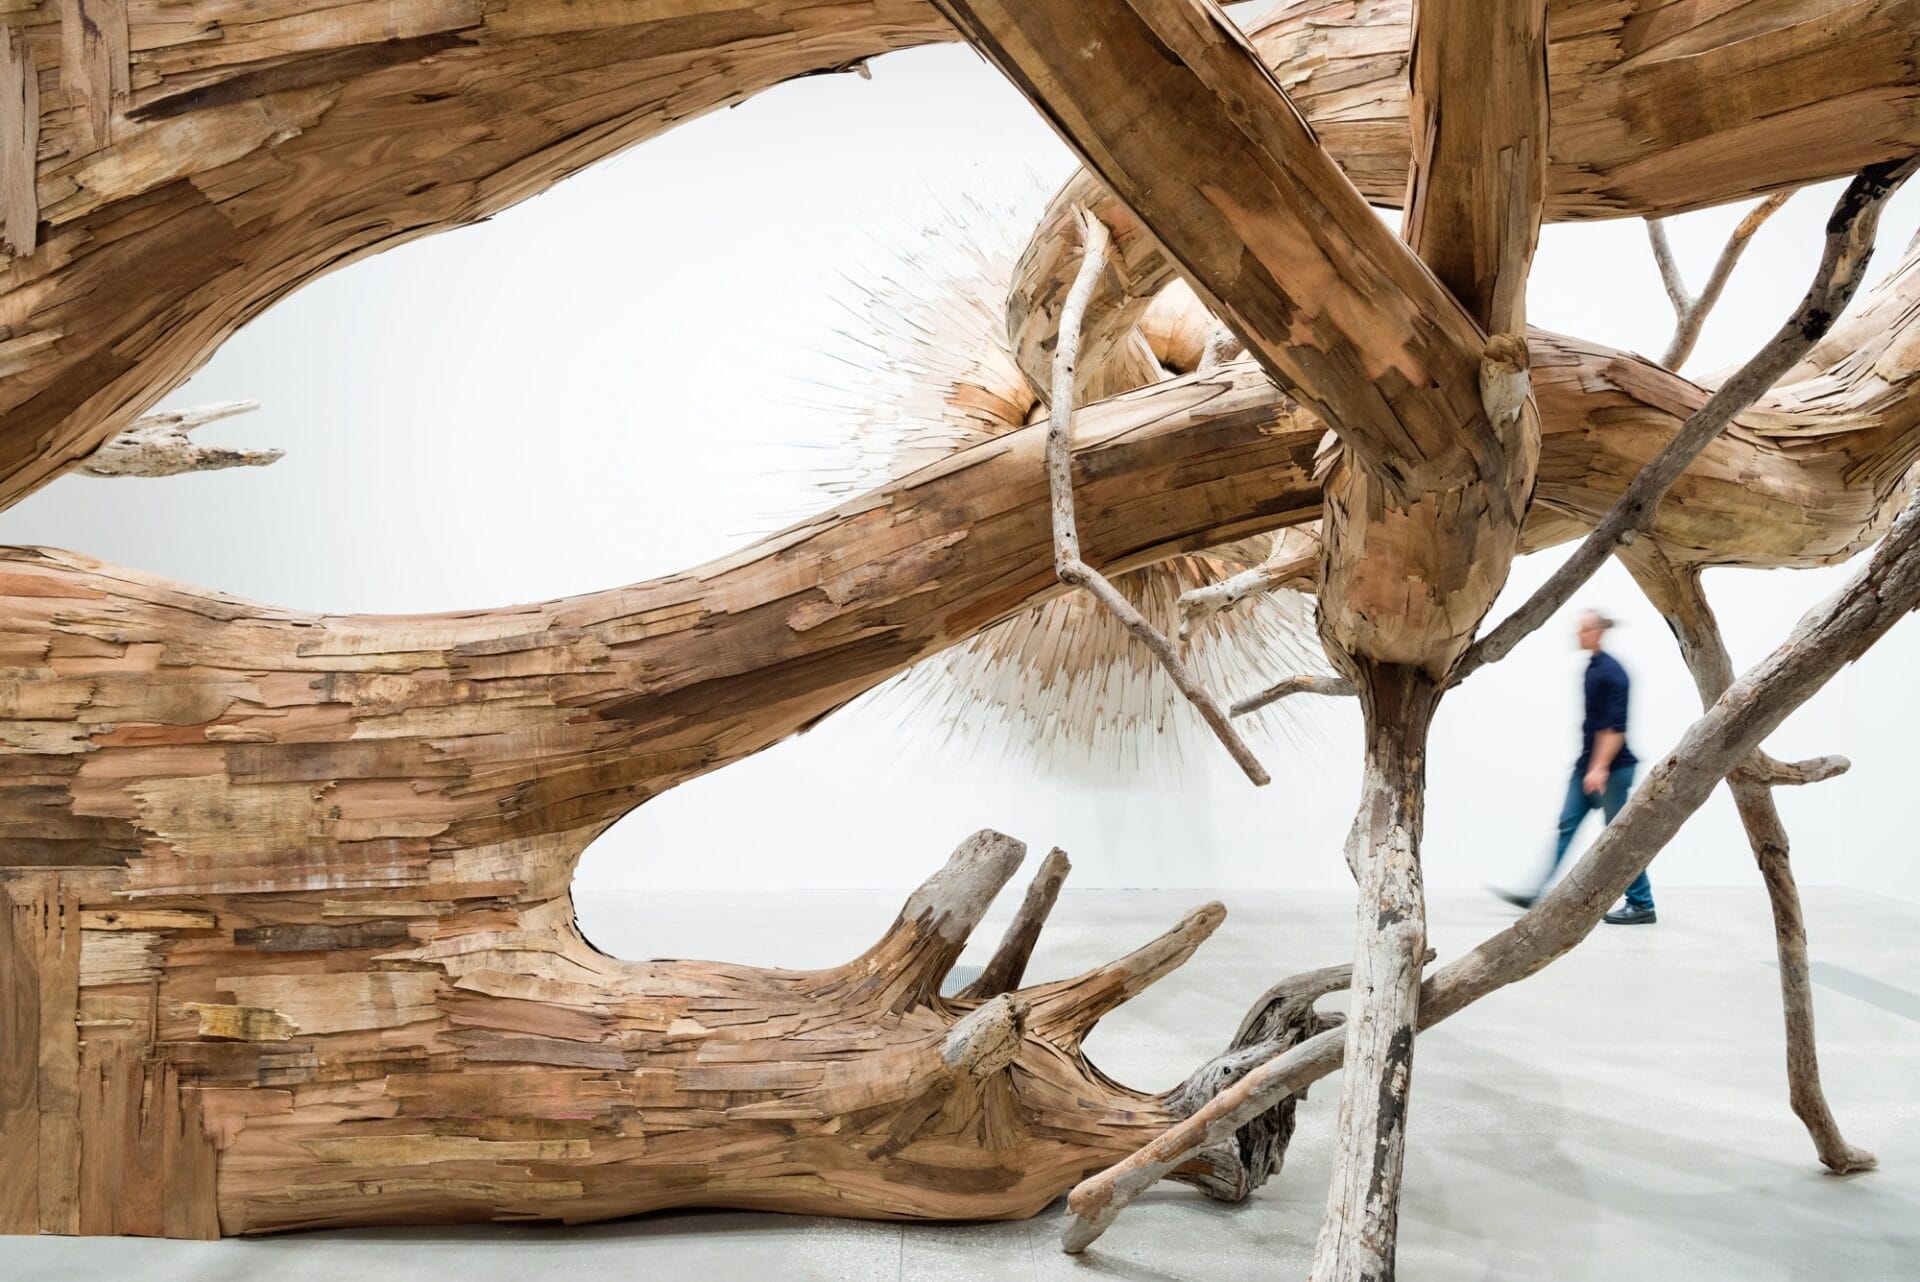 Detail of “Corupira” (2023), plywood, tapumes veneer, and tree branches, installation view of ‘Fairy Tales’ at Gallery of Modern Art Brisbane 2023. Photo by C Callistemon, © Henrique Oliveira and QAGOMA